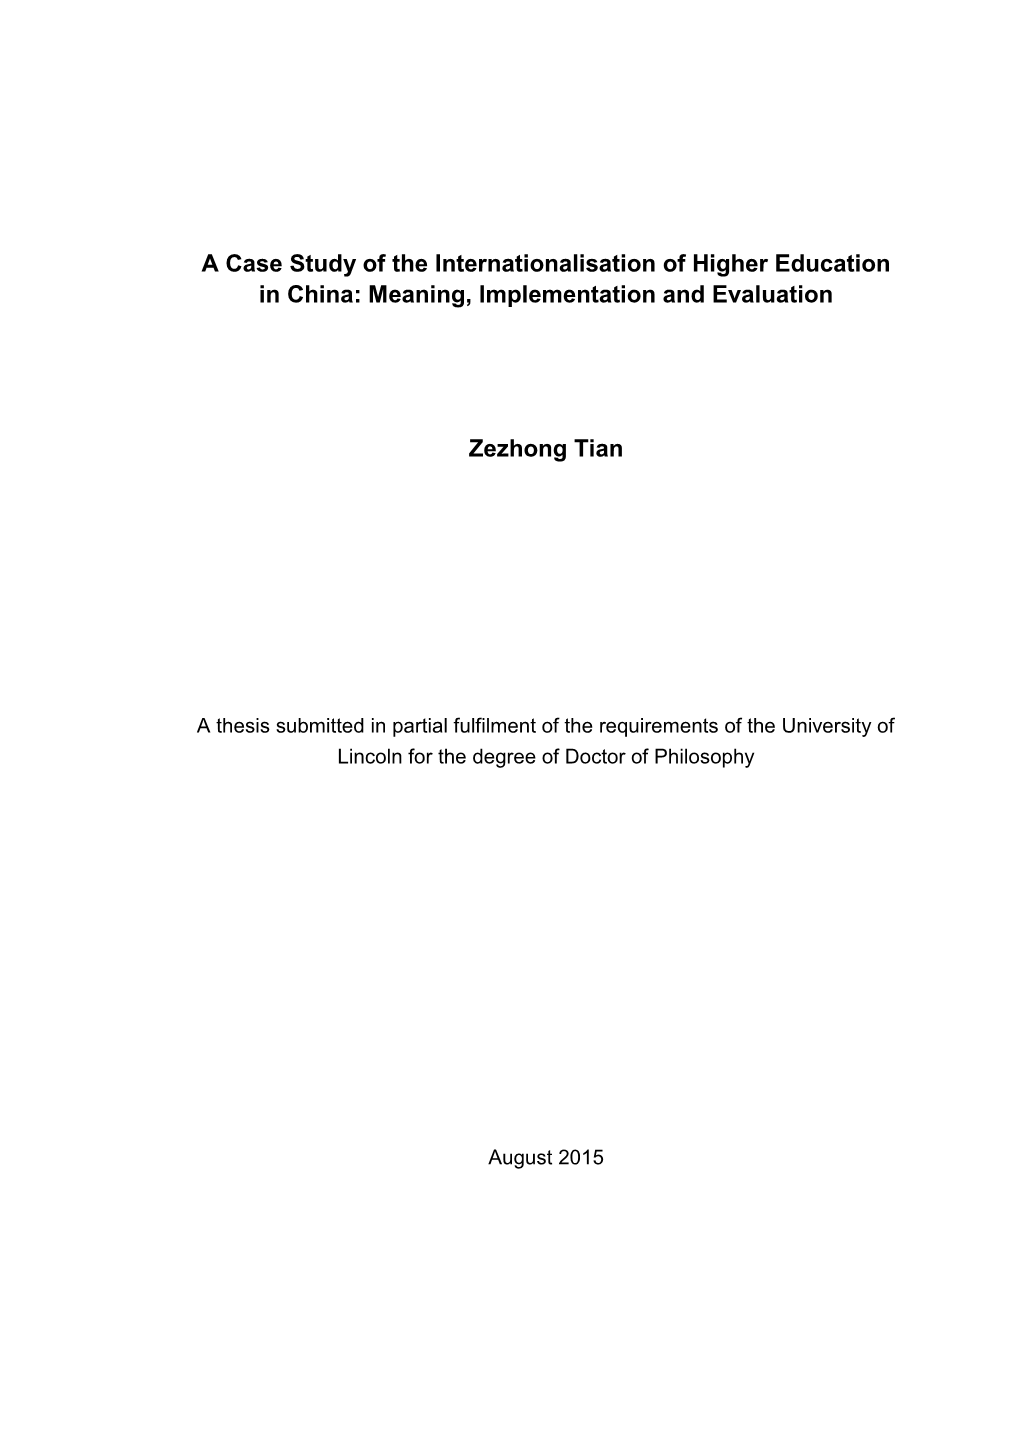 A Case Study of the Internationalisation of Higher Education in China: Meaning, Implementation and Evaluation